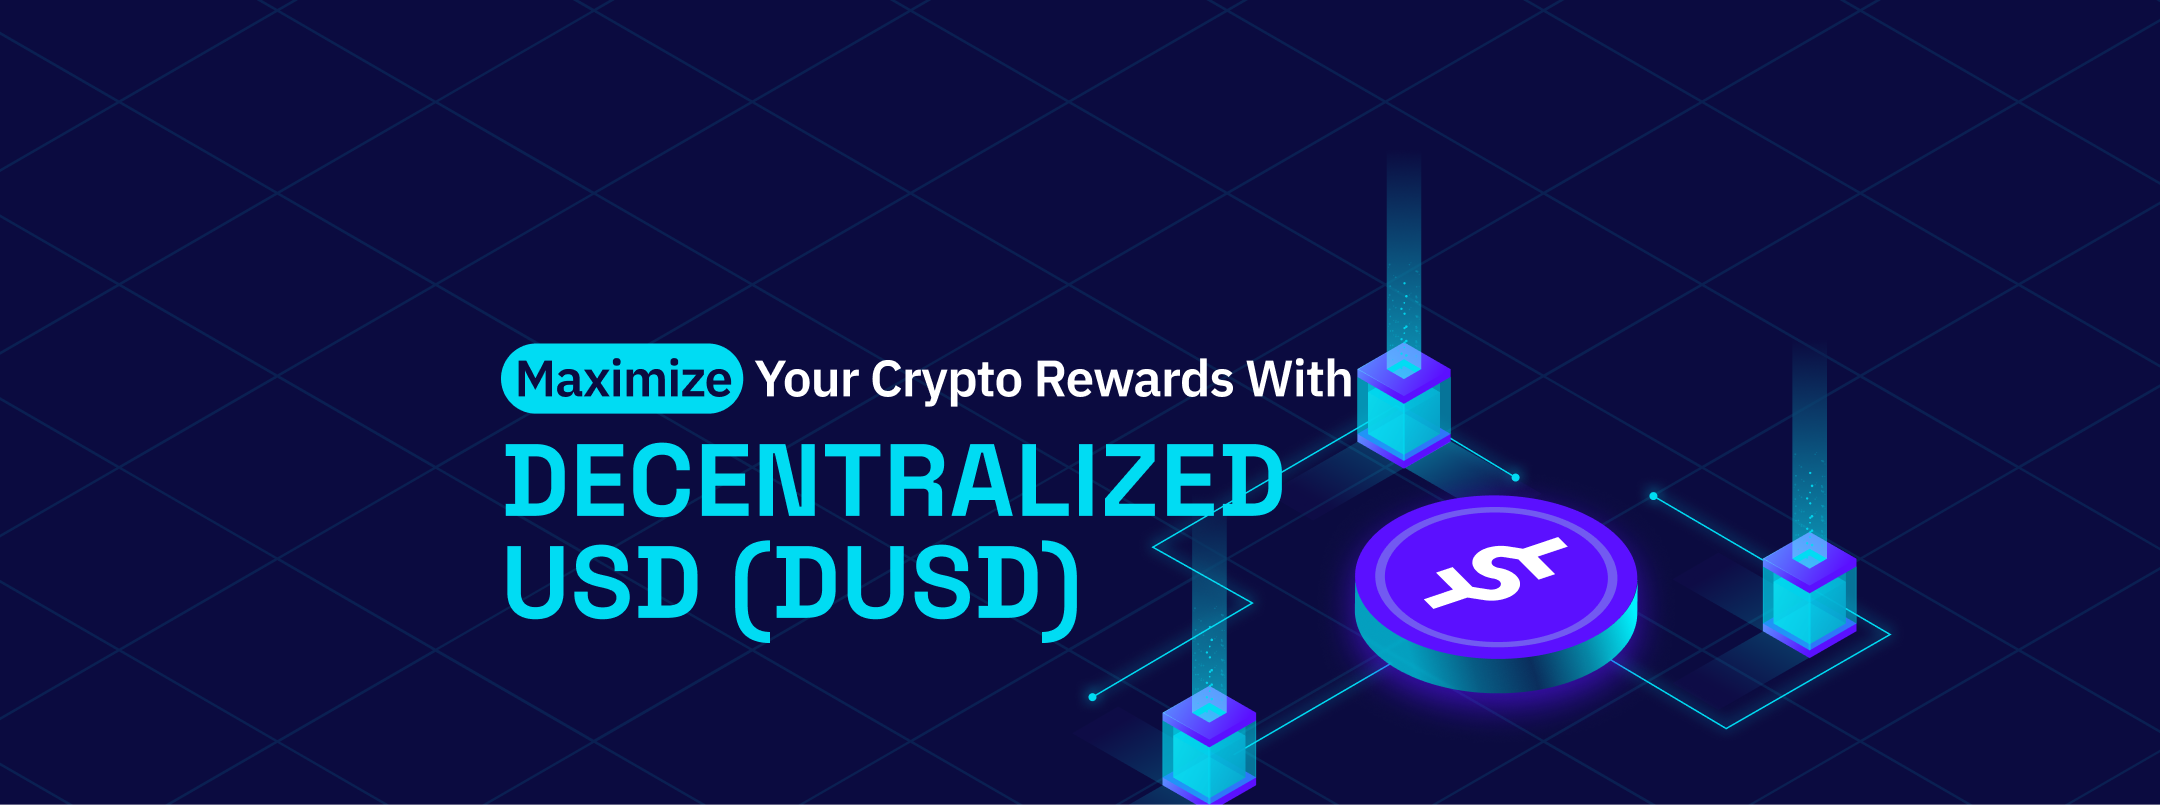 Maximize Your Crypto Rewards with Decentralized USD (DUSD)